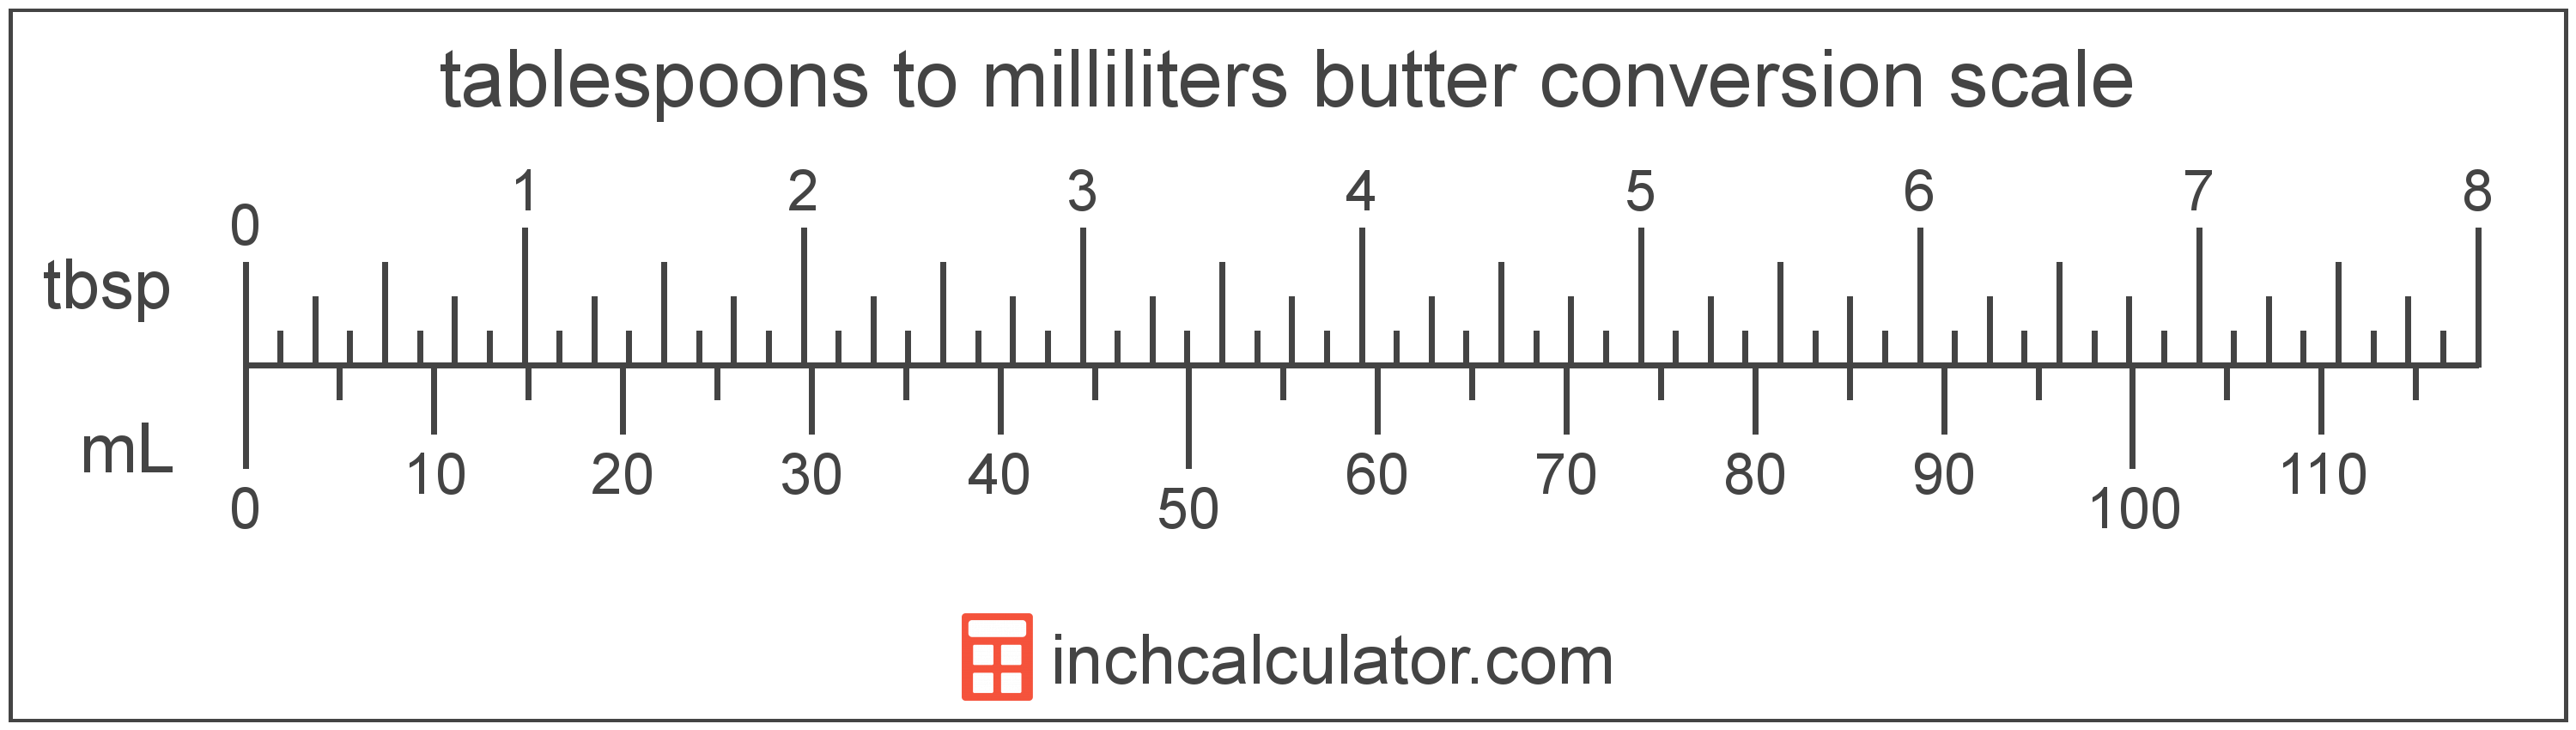 conversion scale showing tablespoons and equivalent milliliters butter values